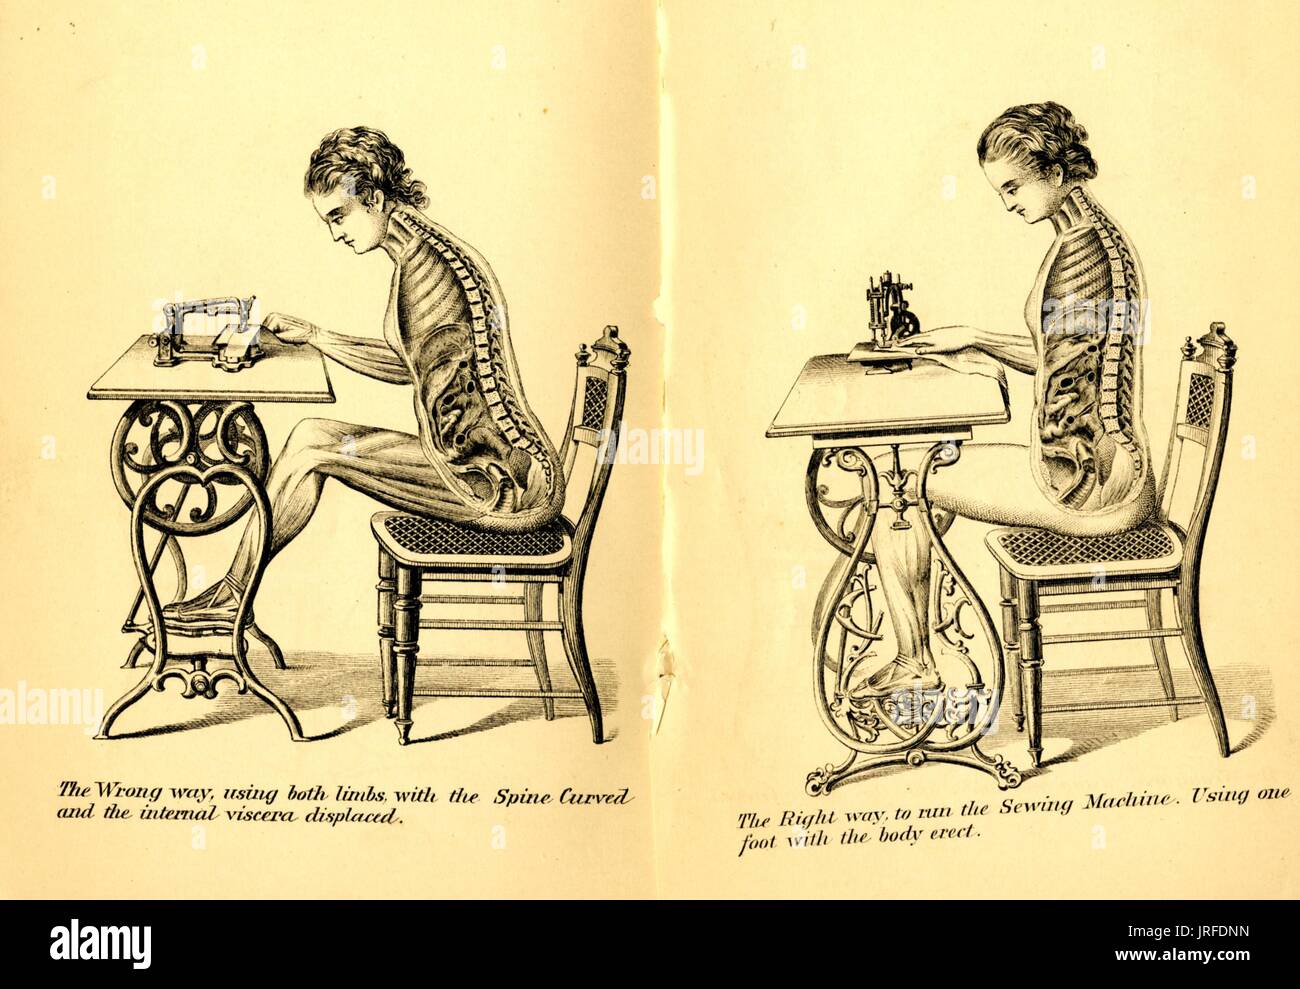 Posture book, showing an illustration of a woman sitting at a chair and using a sewing machine, with both the wrong way and right way to sit illustrated, the womans viscera and organs visible in a cutout view demonstrating how the proper posture for sitting causes the organs to be oriented correctly within the womans body, 1900. Stock Photo